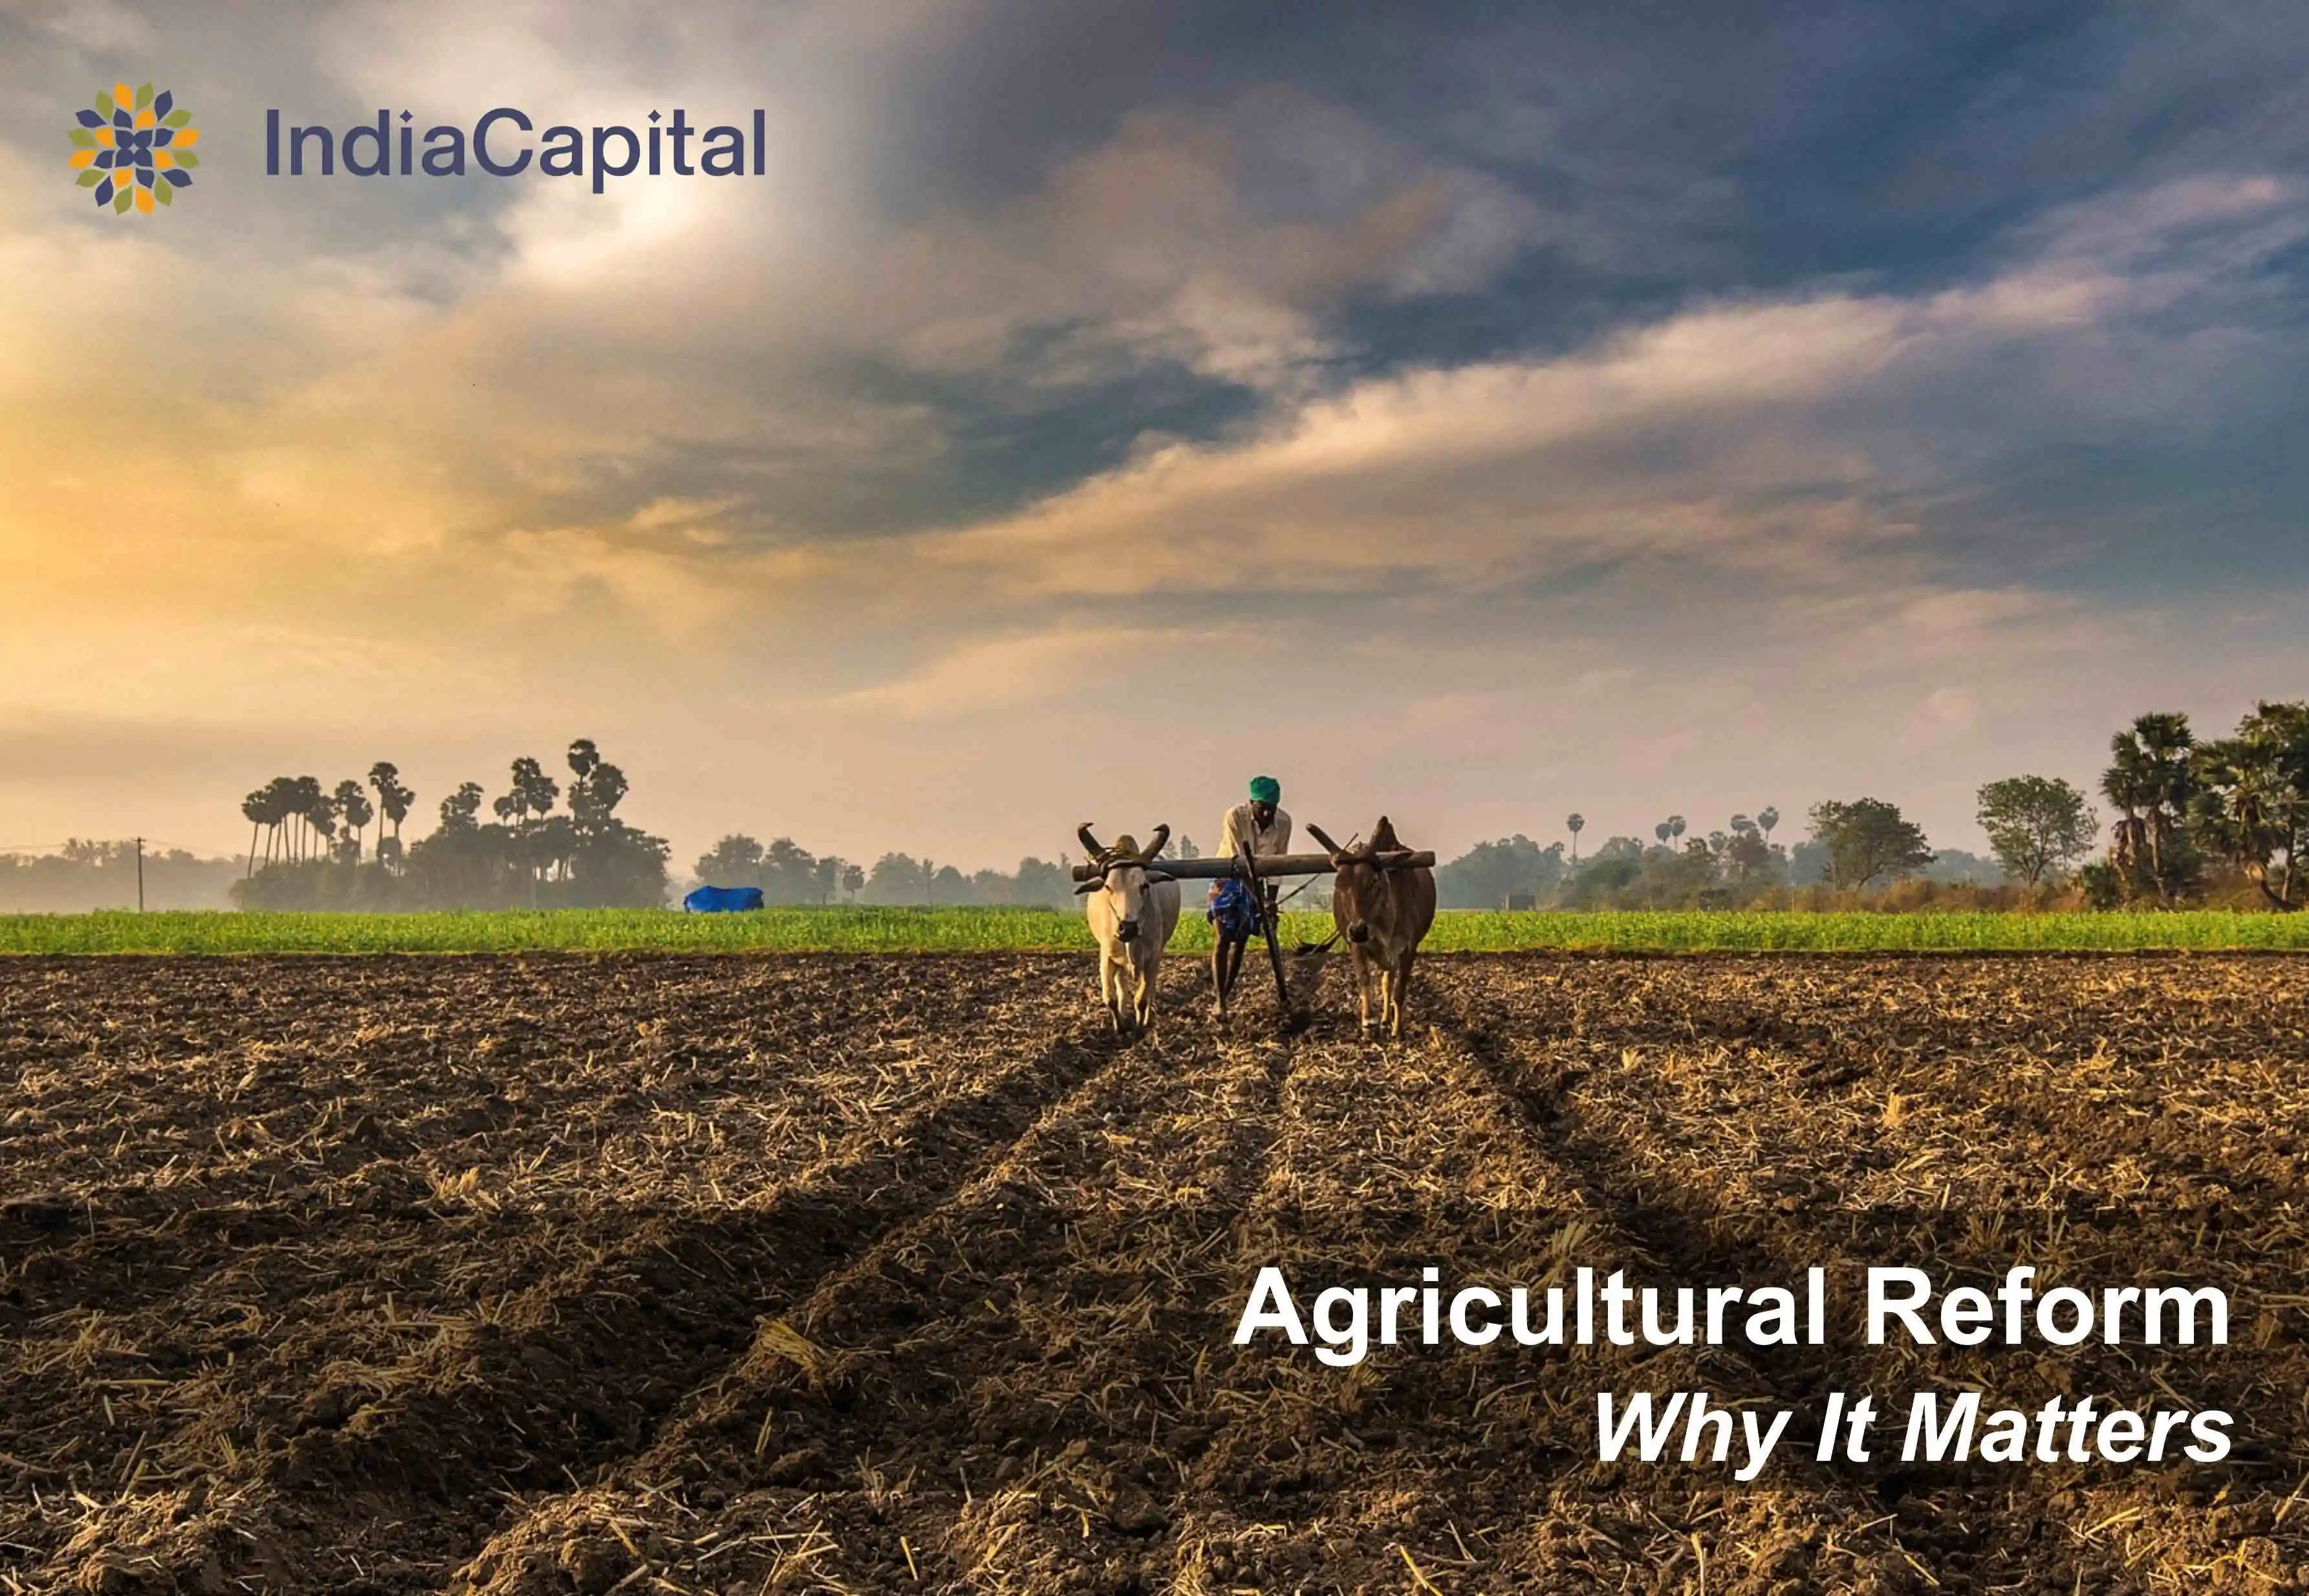 Agricultural Reforms - A Lost Opportunity